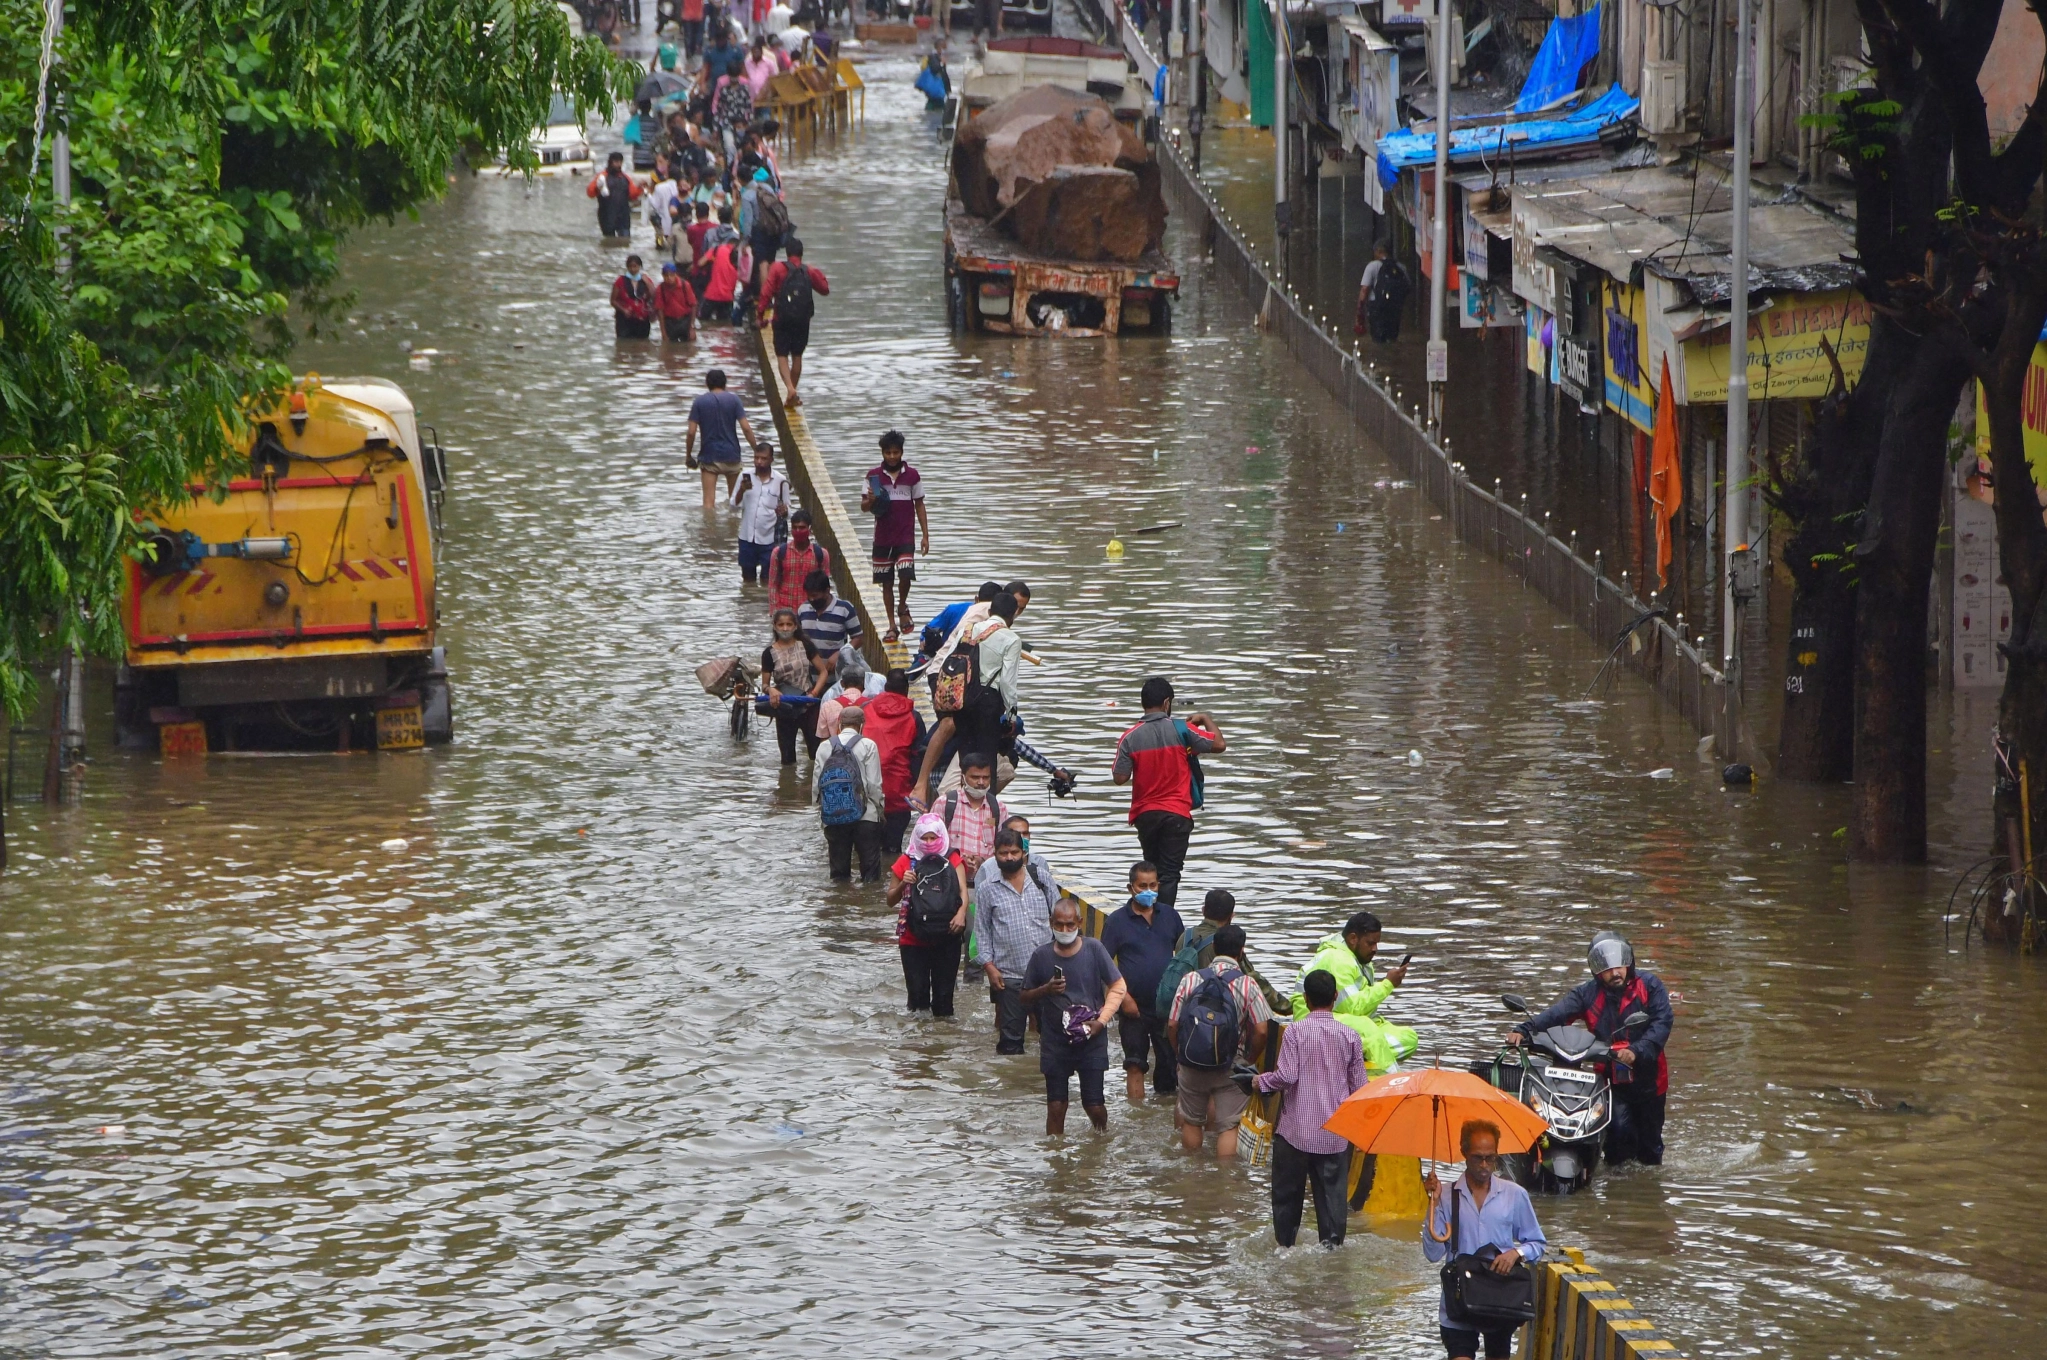 Mumbai’s Climate Action Plan must be inclusive, the interests of the vulnerable sections must be considered, says urban anthropologist Nikhil Anand and urban planner, Lalitha Kamath